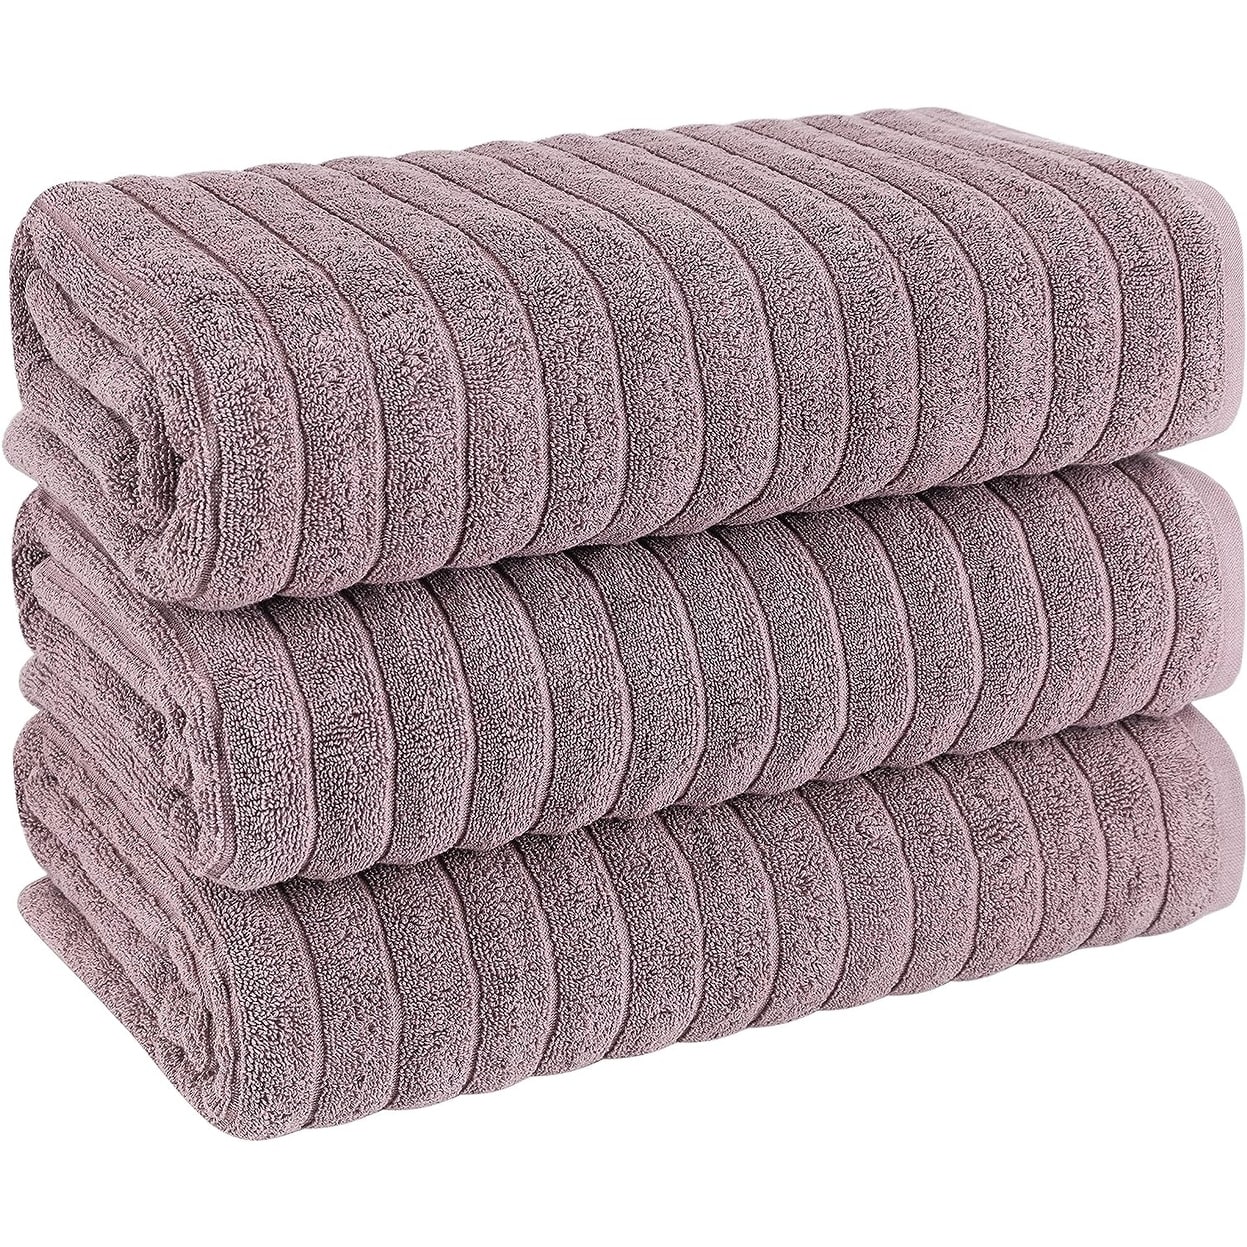 https://ak1.ostkcdn.com/images/products/is/images/direct/4ca8c50324f49b512ab380dc46f866f96e2e651d/Classic-Turkish-Towels-Plush-Ribbed-Cotton-Luxurious-Bath-Sheets-%28Set-of-3%29-40x65%22.jpg